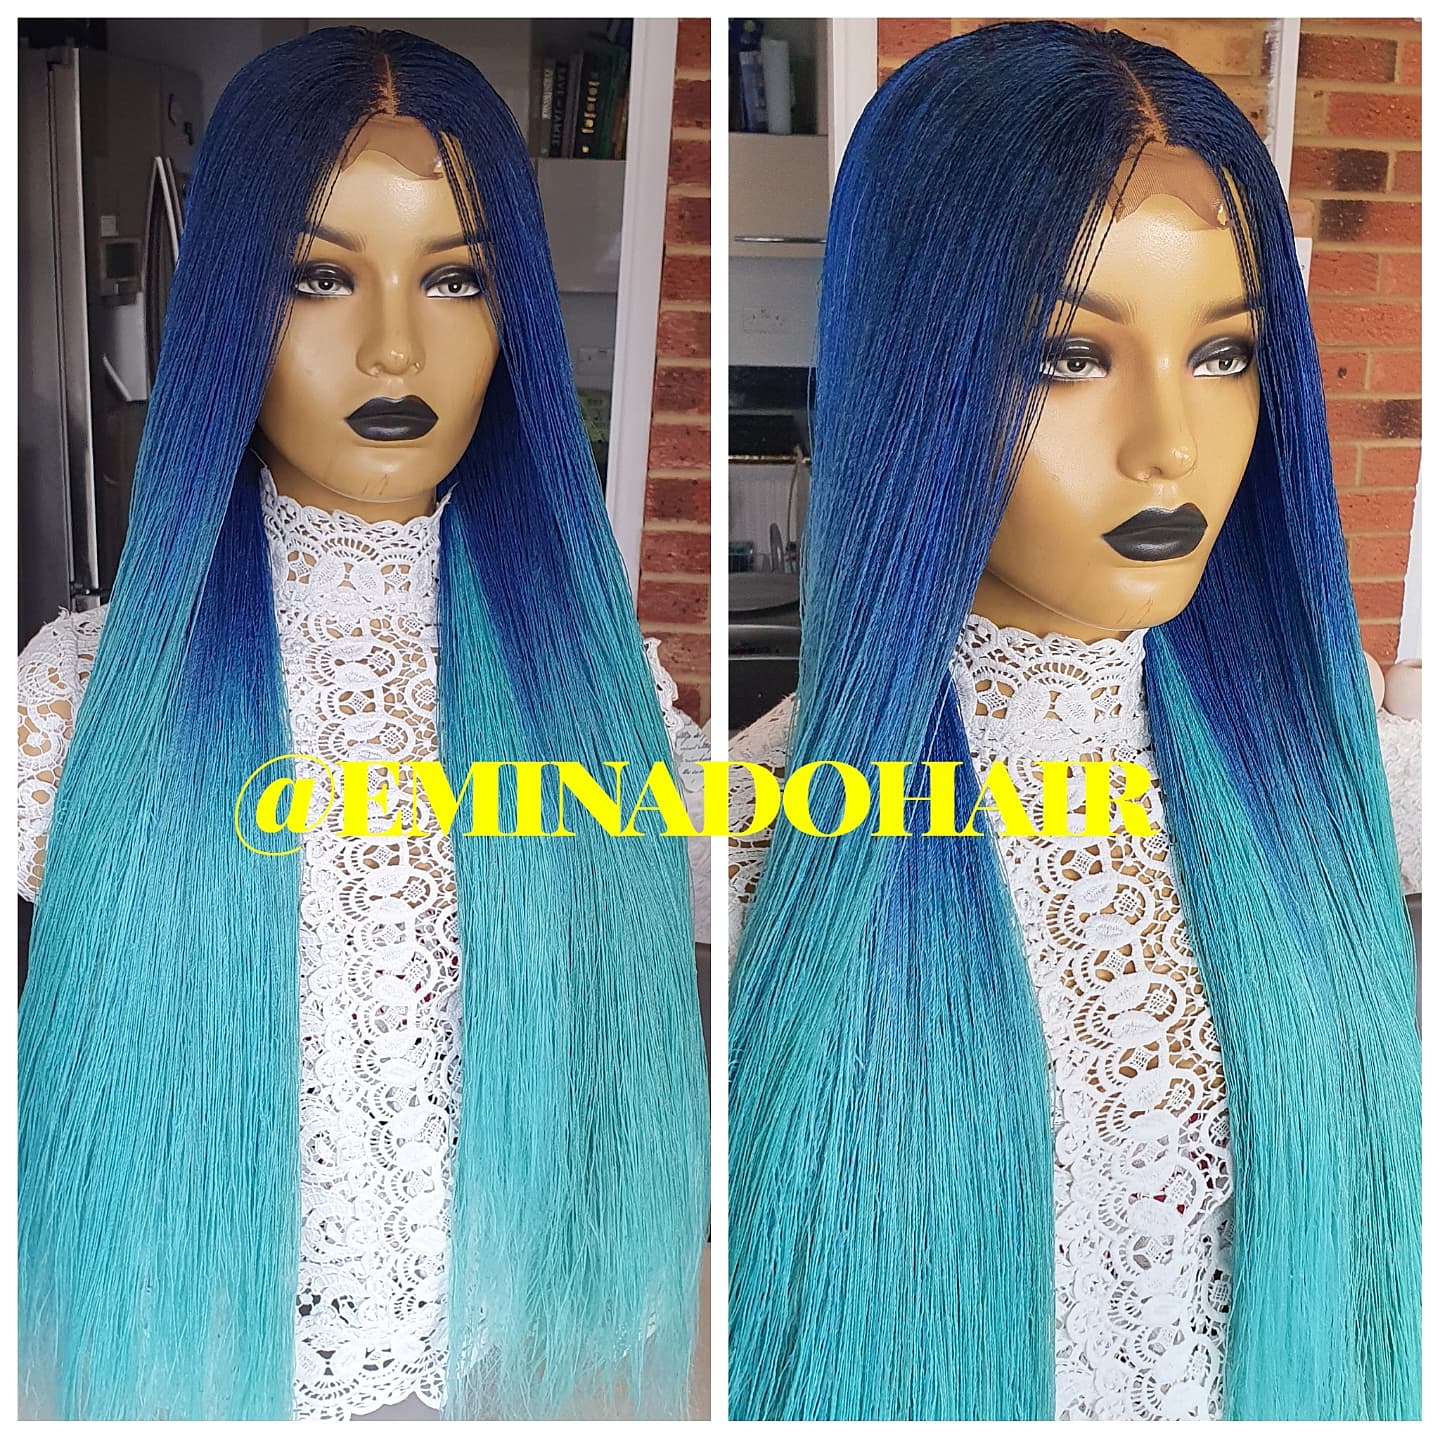 Sky Blue Ombre Senegalese Closure Twists Braided Wig